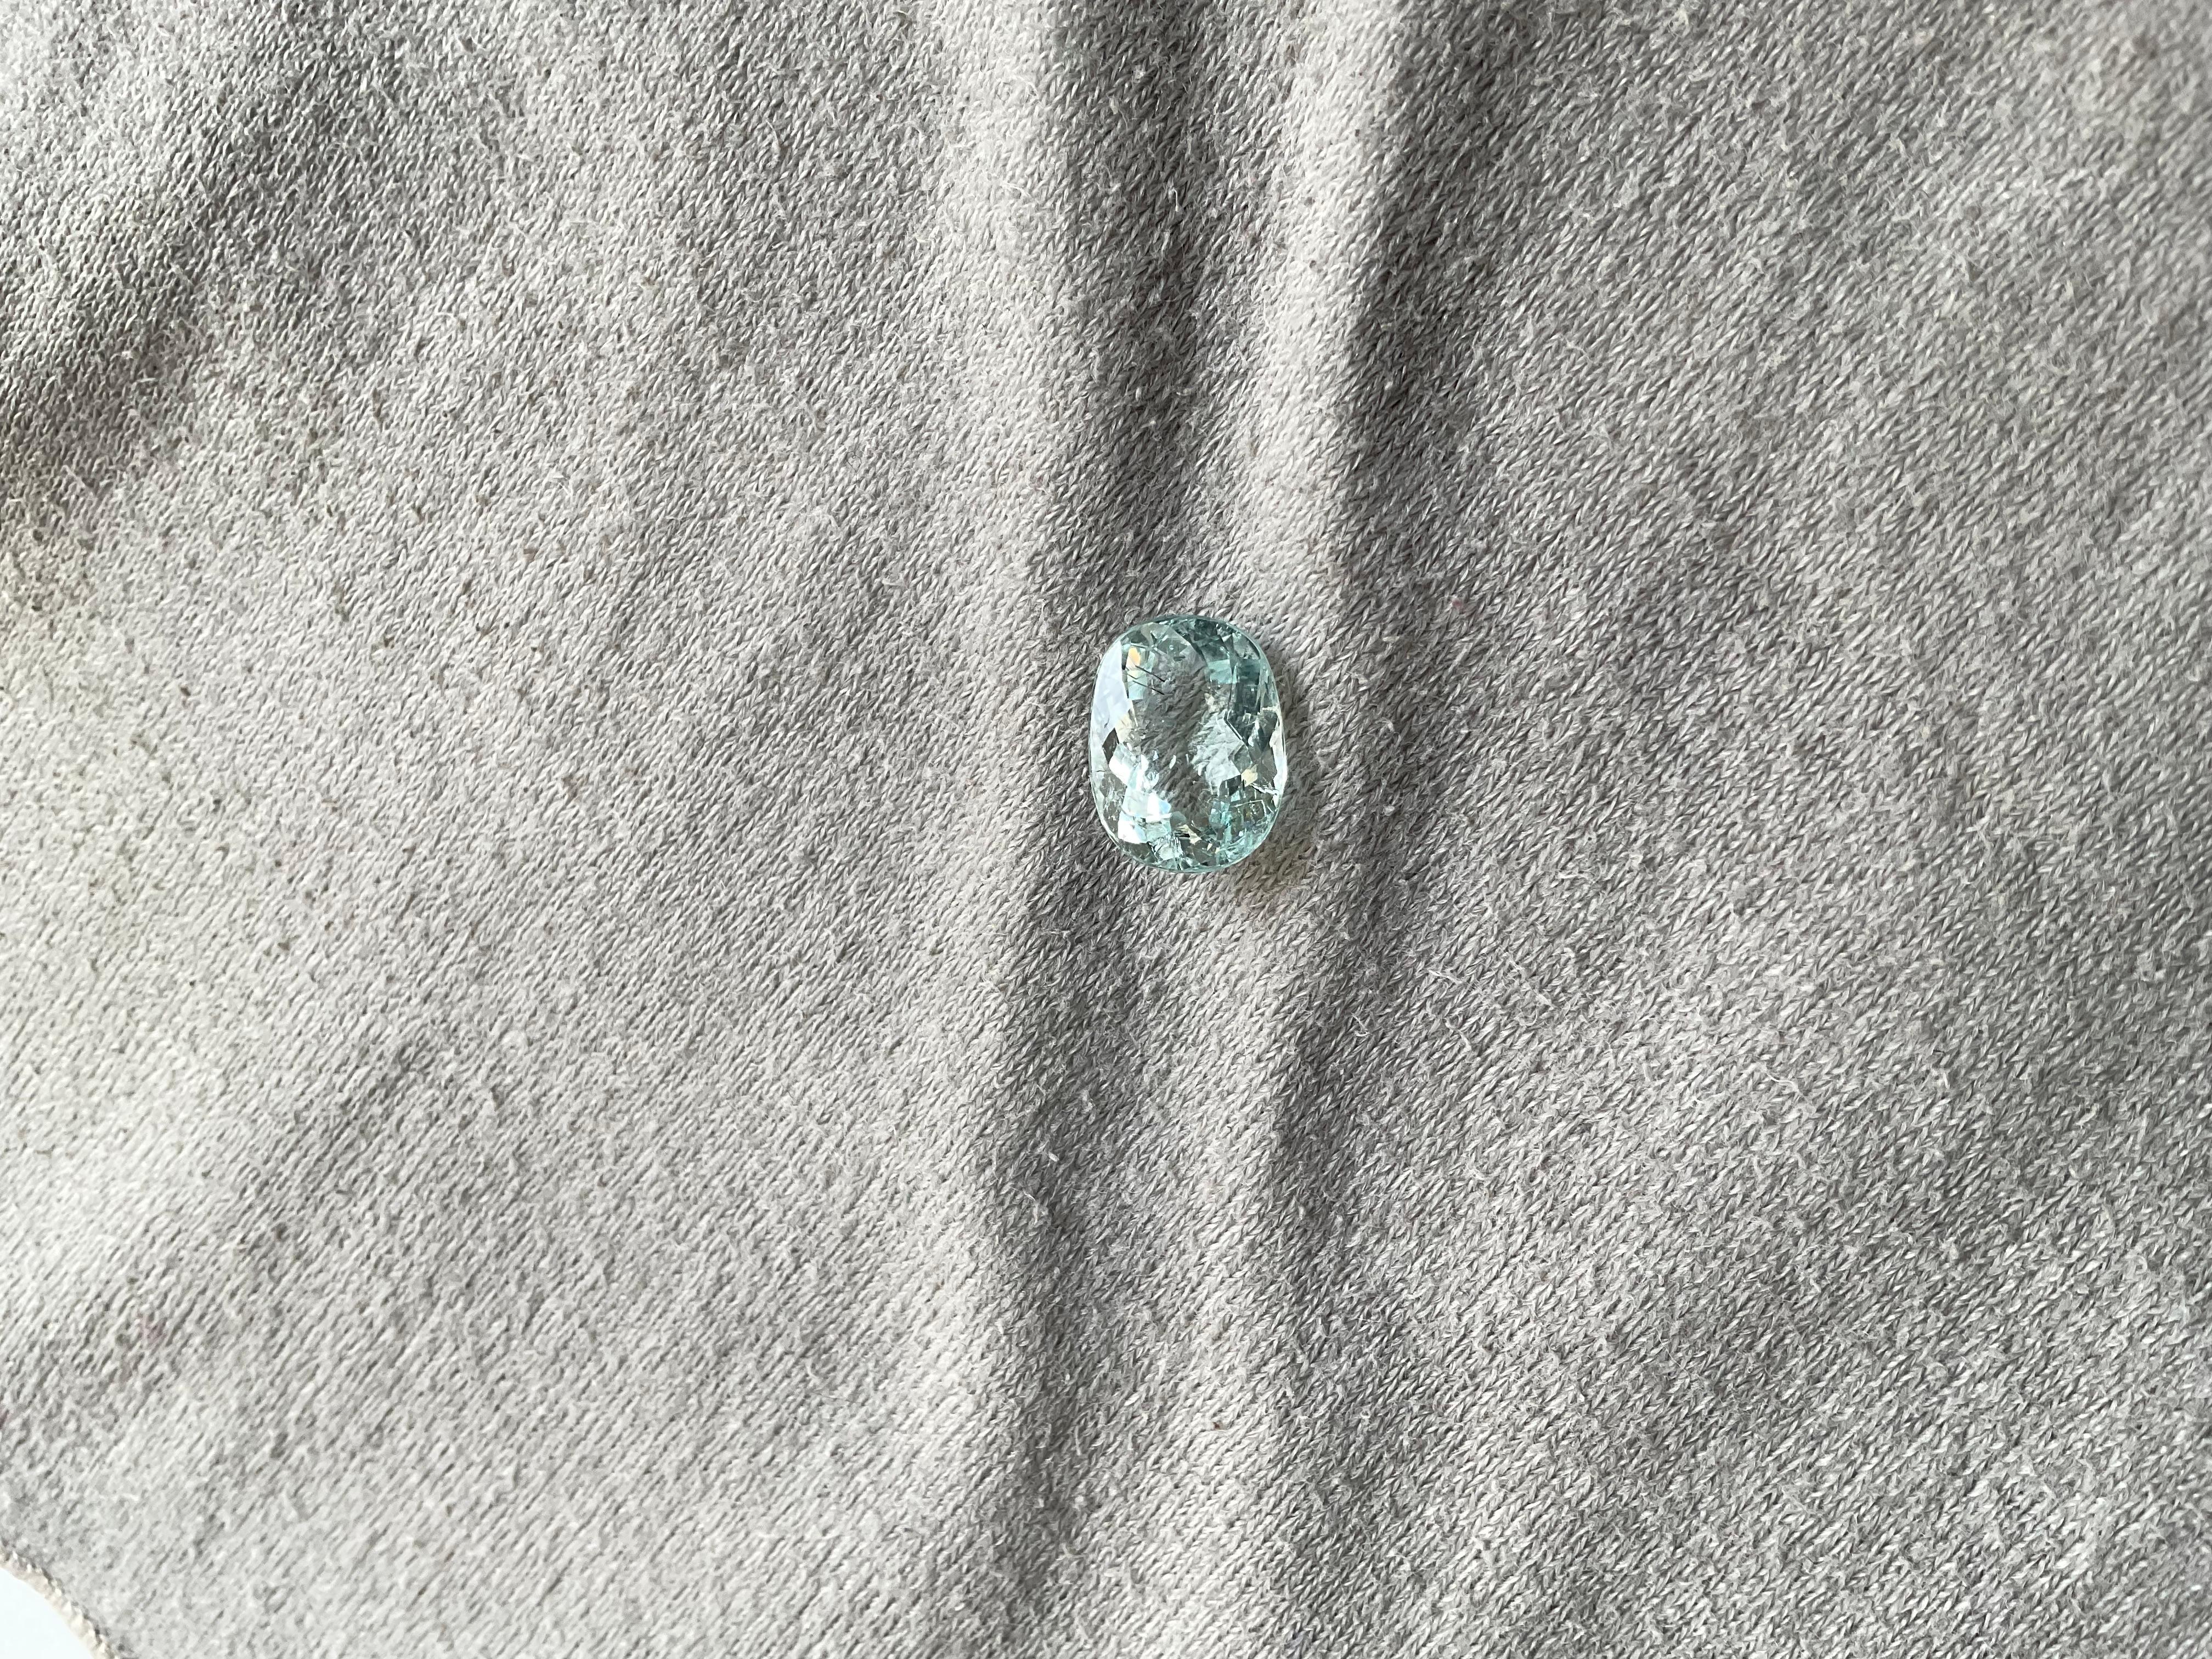 Women's or Men's 3.96 Carats Paraiba Tourmaline Oval Cut Stone for Fine Jewelry Natural gemstone For Sale